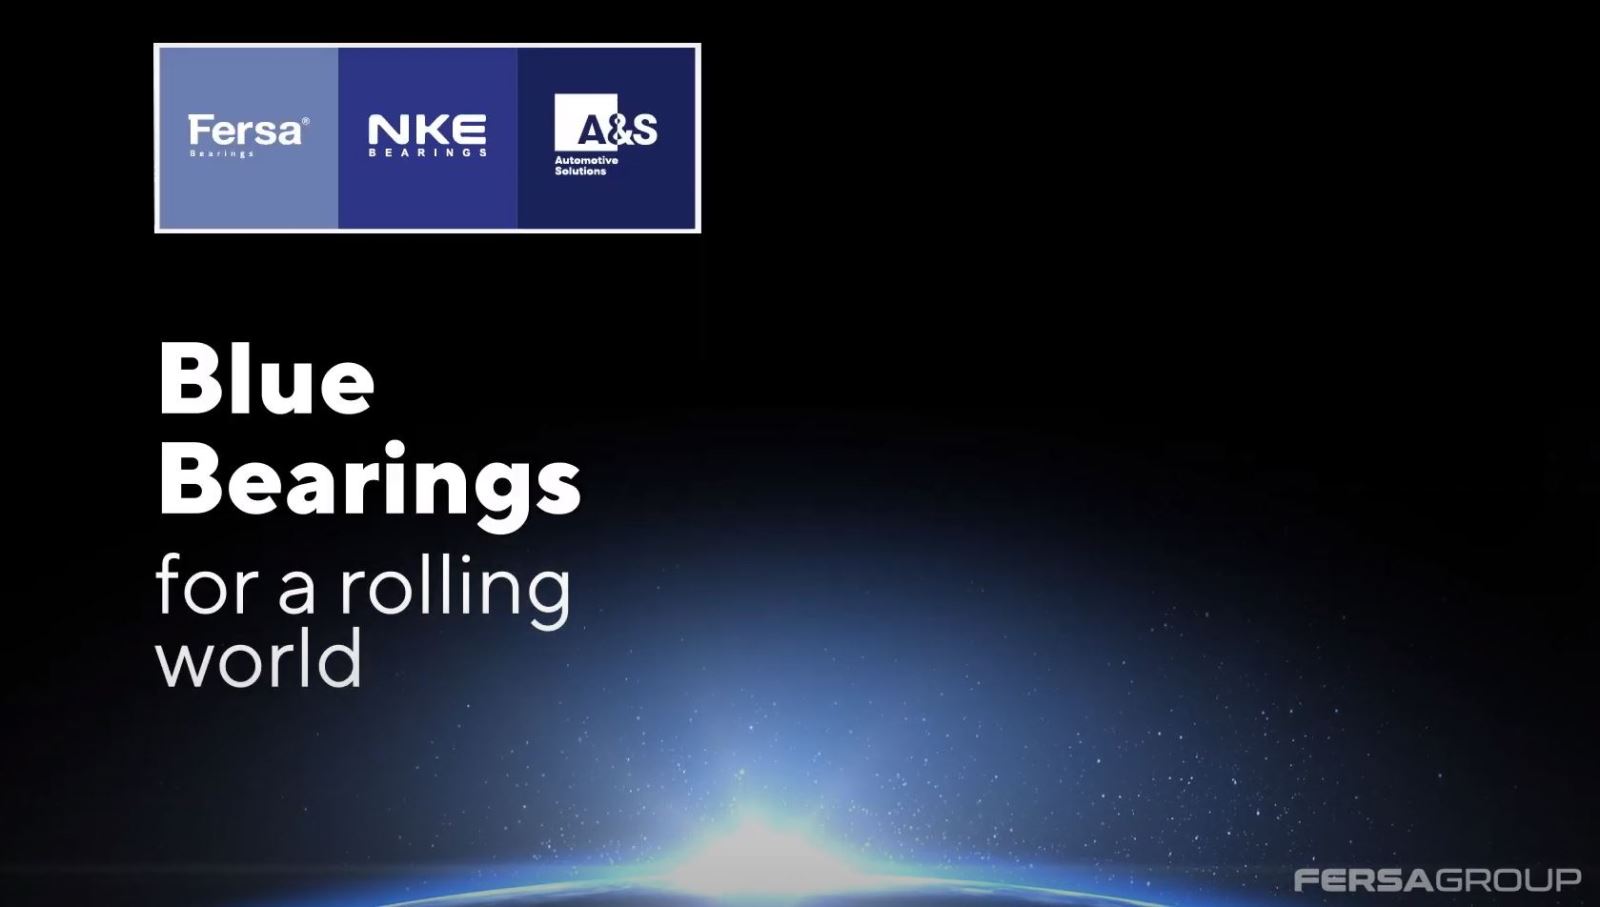 Fersa Group: Blue Bearings for a Rolling World